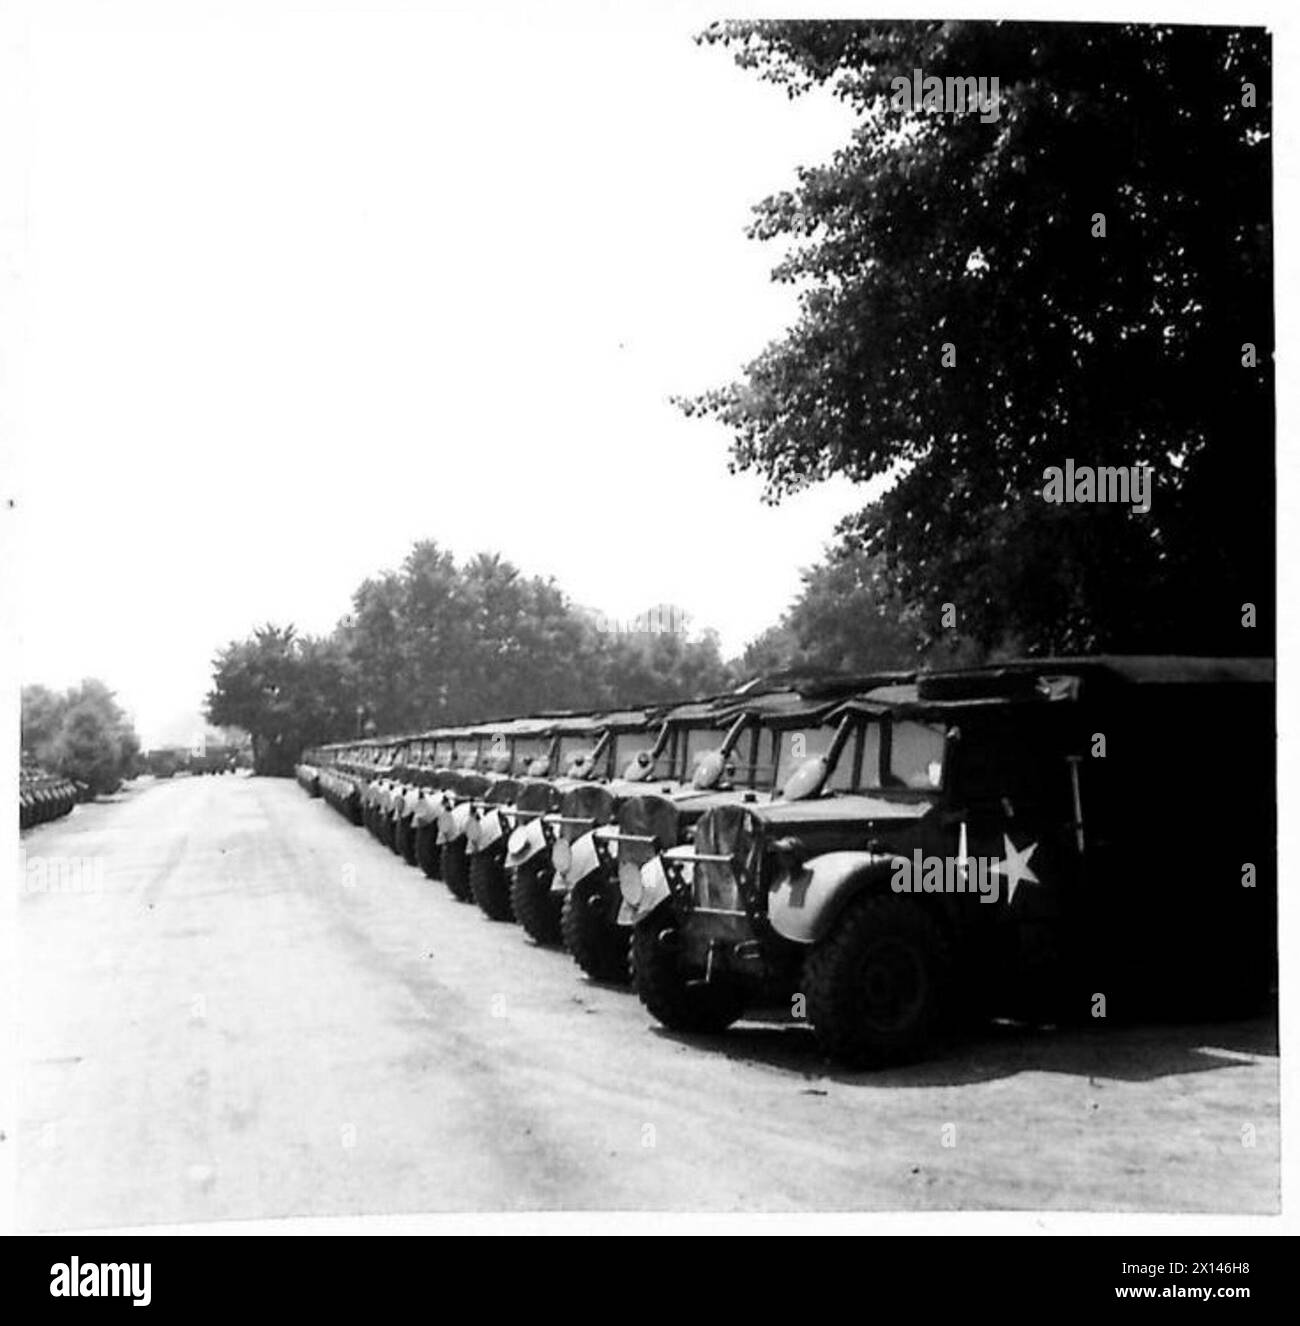 SPECIAL ASSIGNMENT FOR W.S.7. - Ford 15 cwts. Laleham. No.1 V.R.D British Army Stock Photo